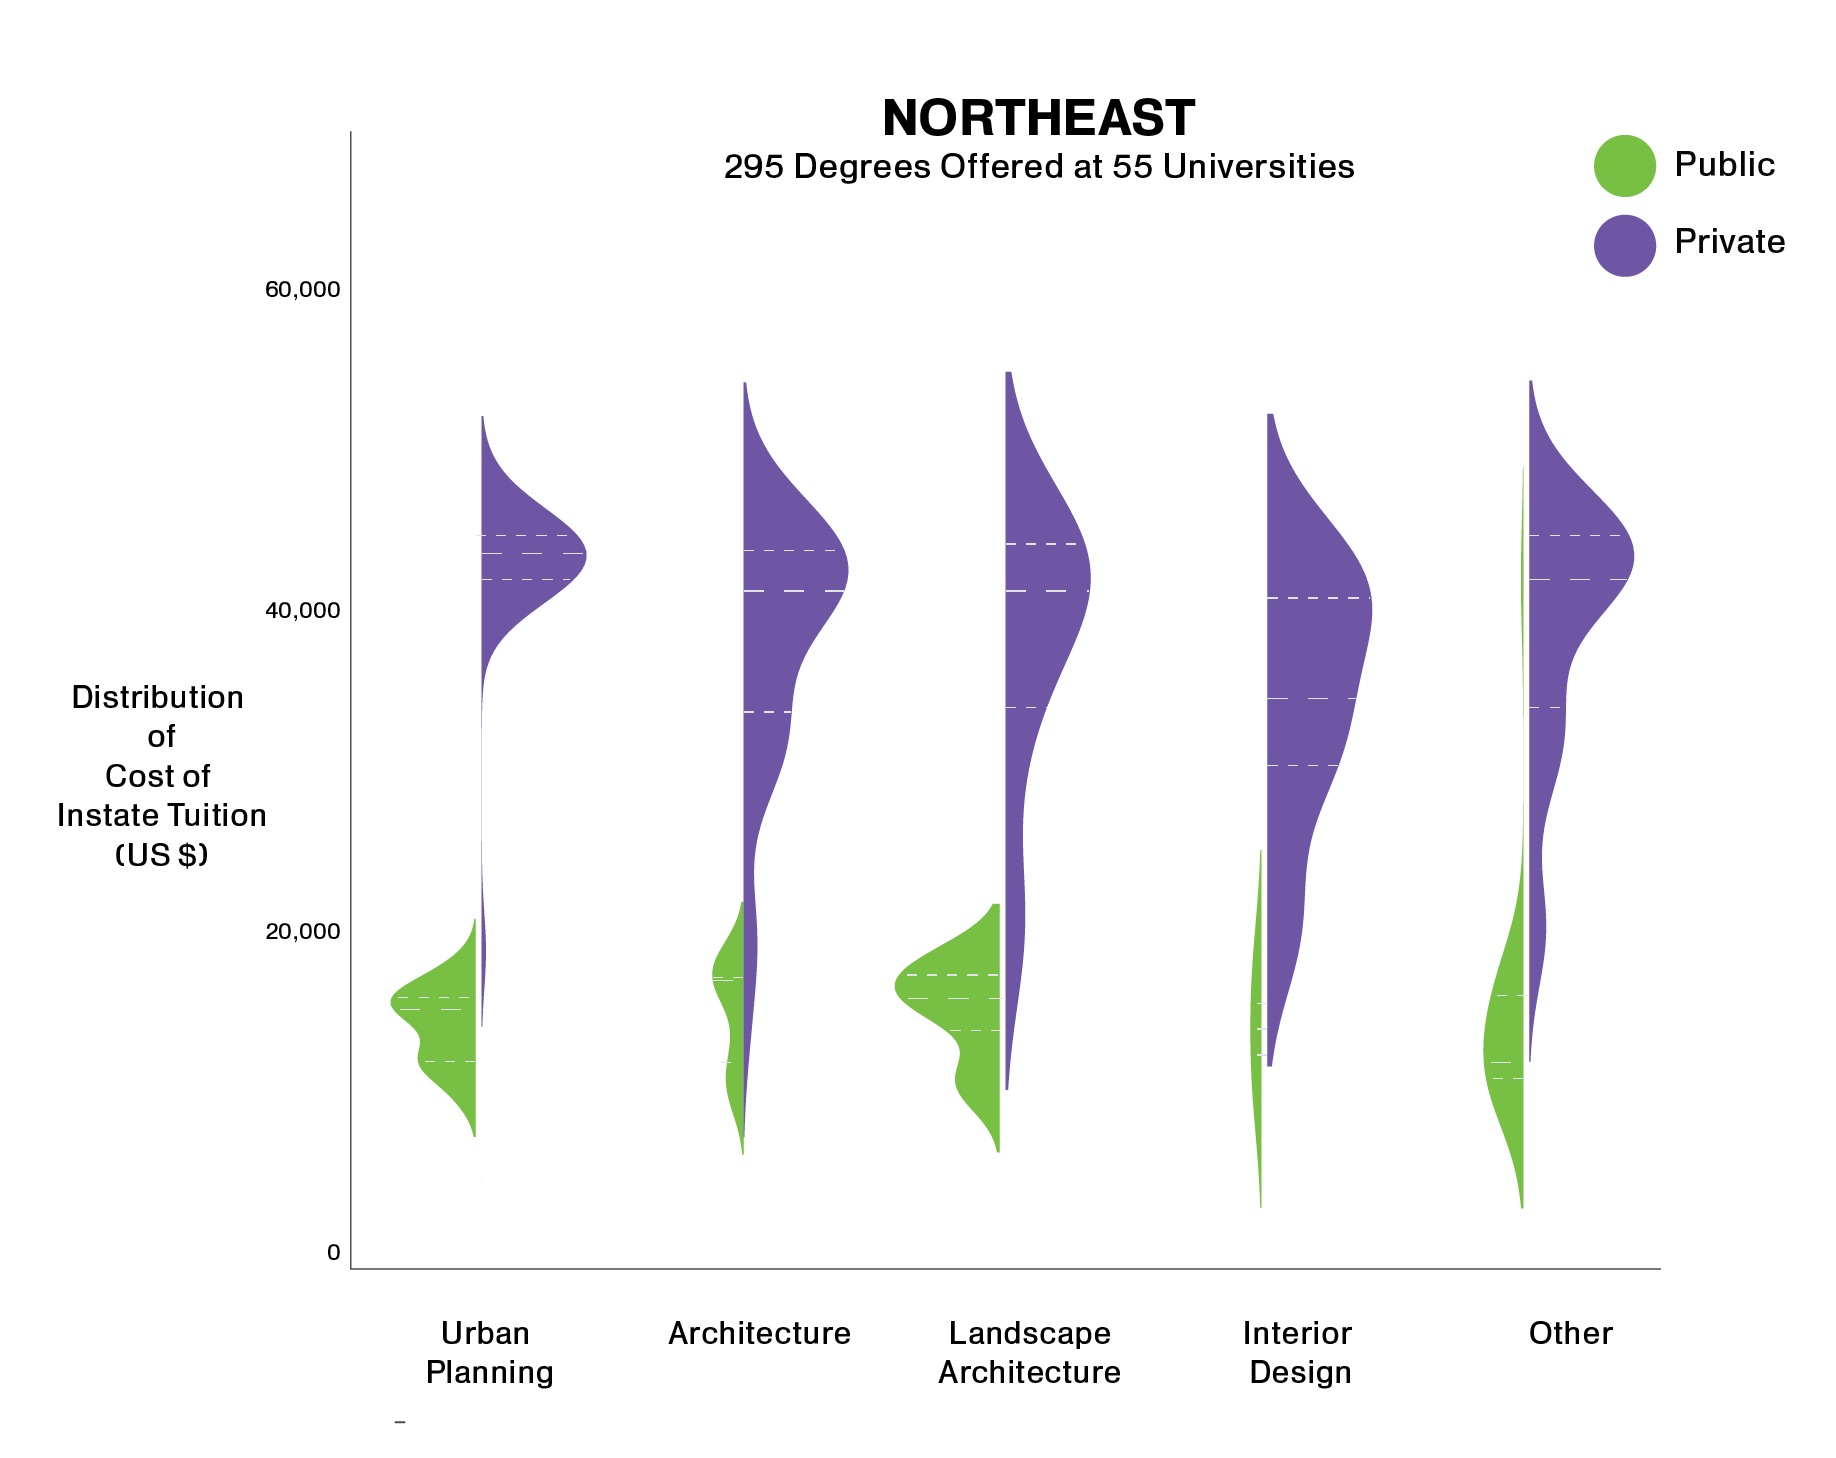 Comparison of Tuition Costs in the Northeast by Area of Study